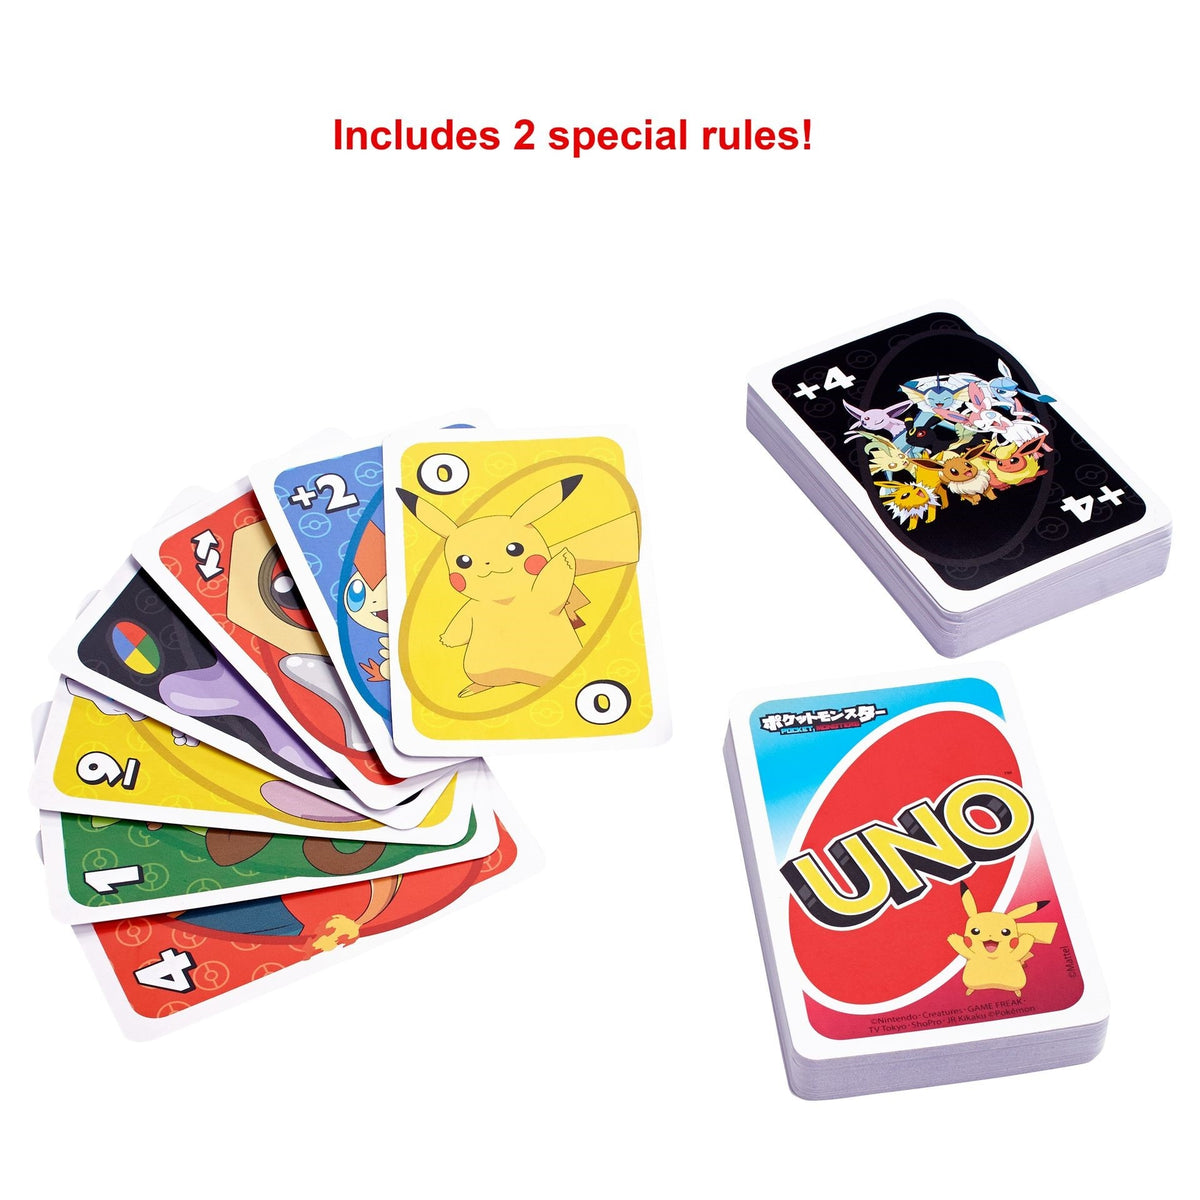 UNO behind The Pokemon board game